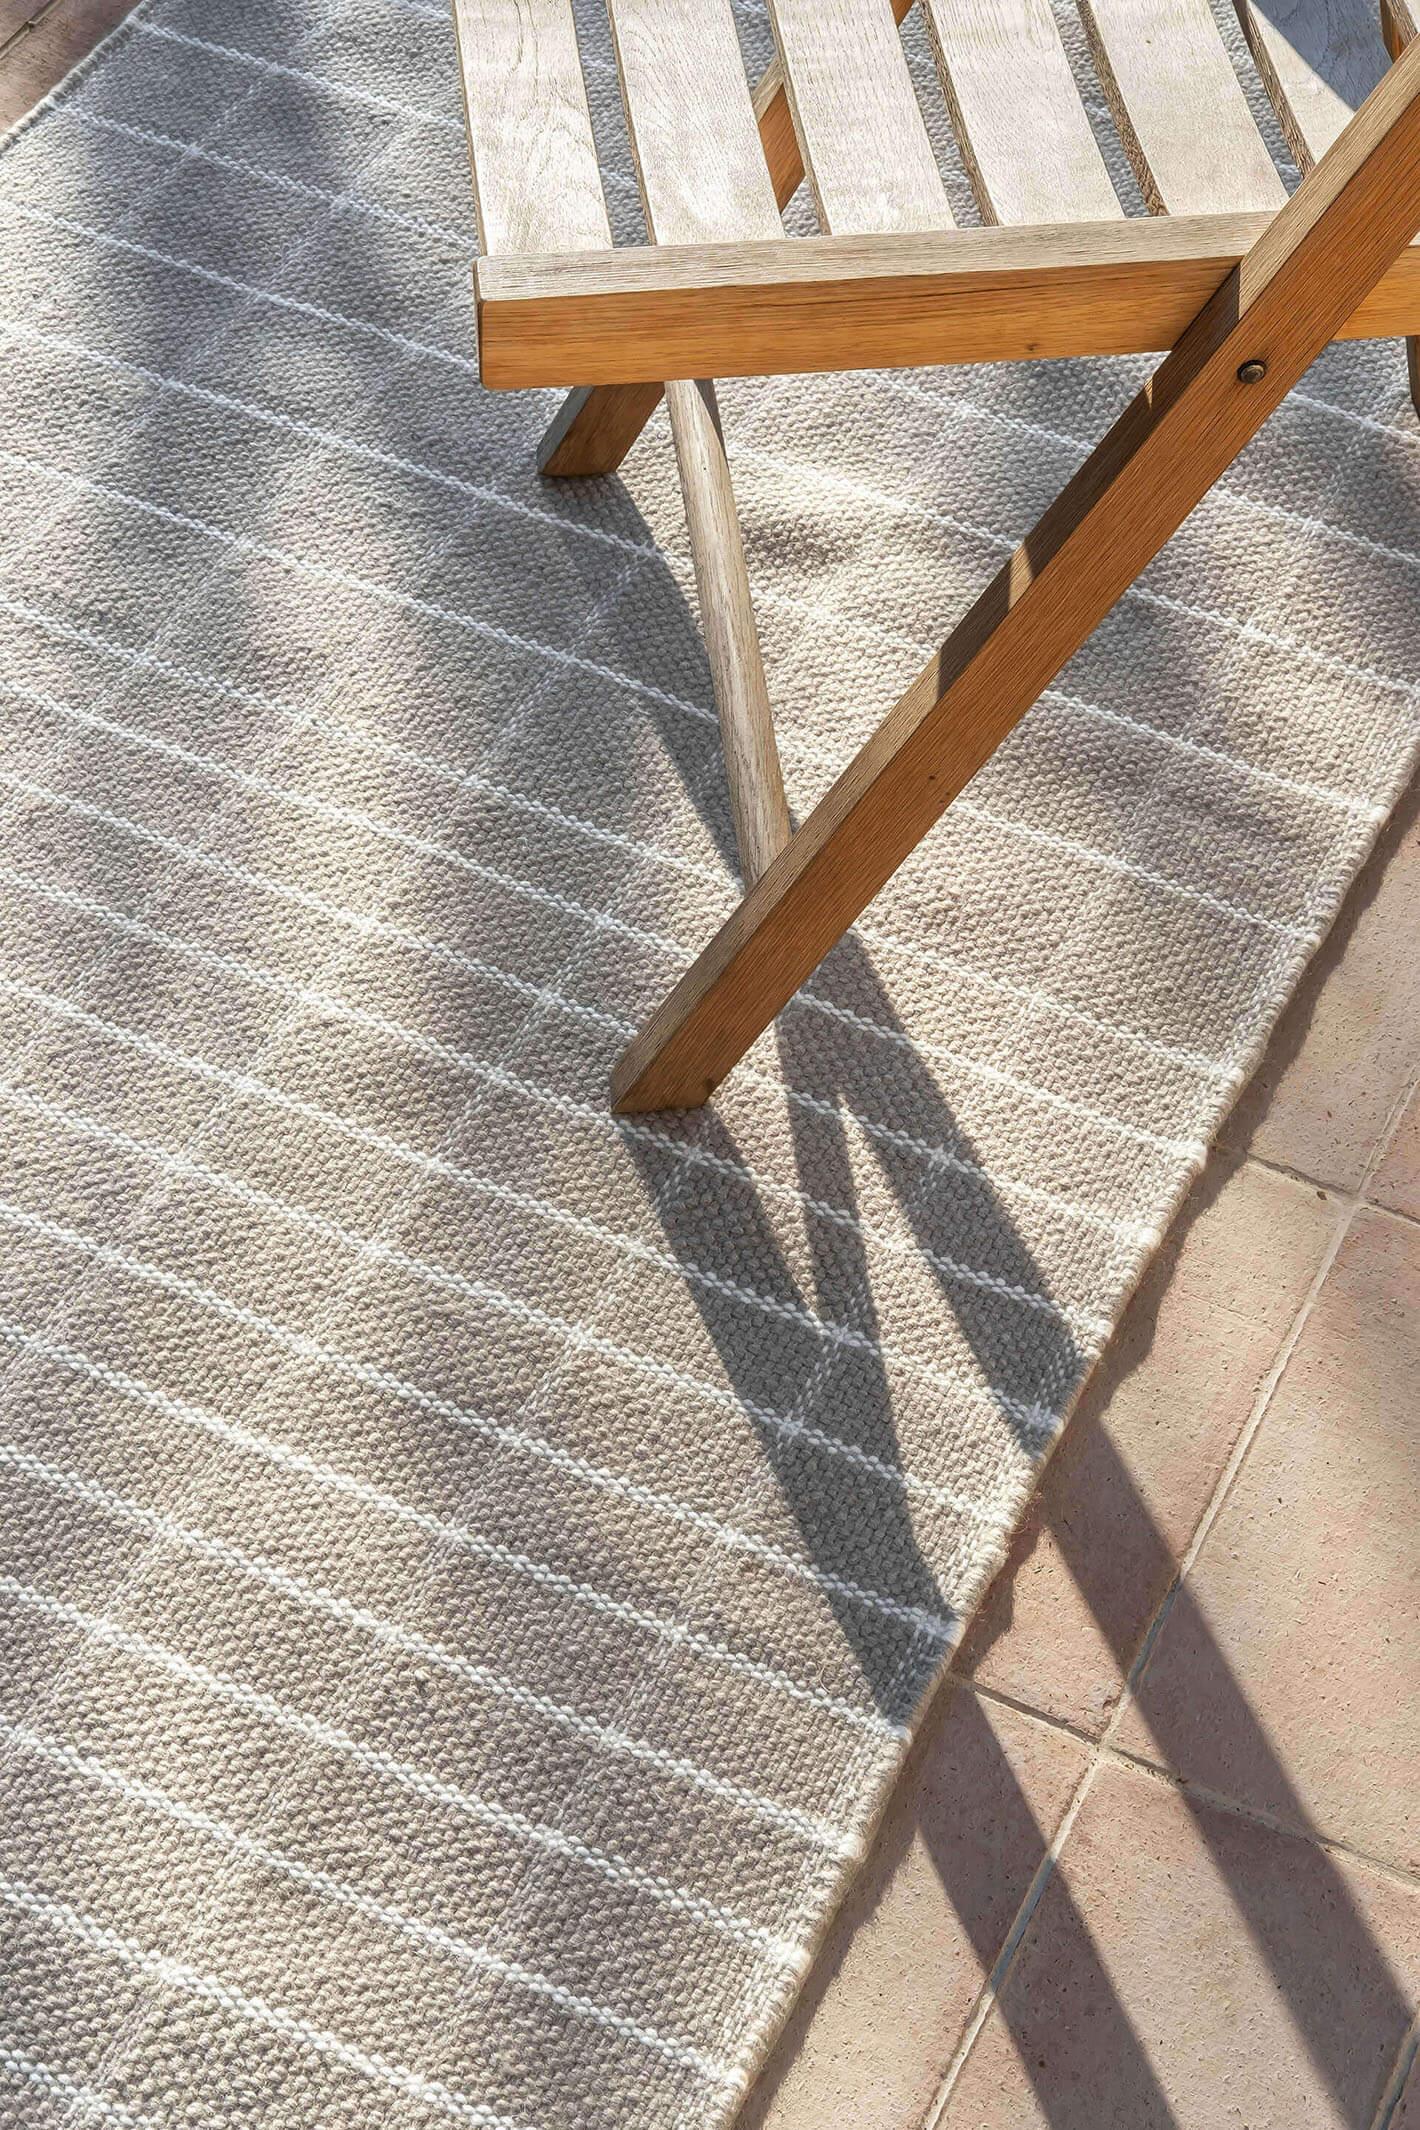 The Tiles collection, designed by Nani Marquina, draws its inspiration from the square and rectangular patterns found in the pavements of public spaces. These square and rectangular modules create an architectural pattern so as to be able to add or